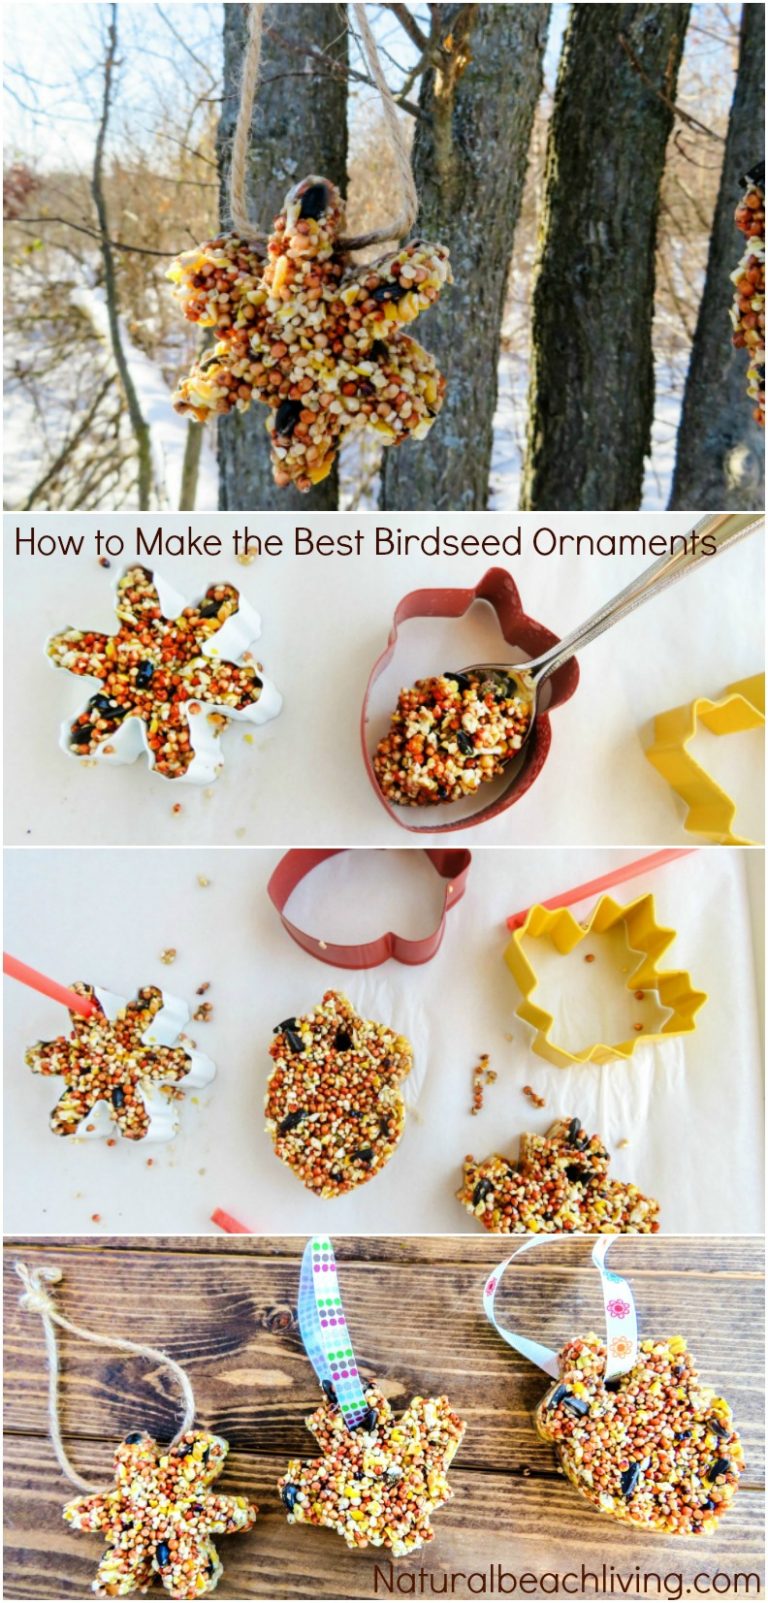 How to Make The Best Birdseed Ornaments